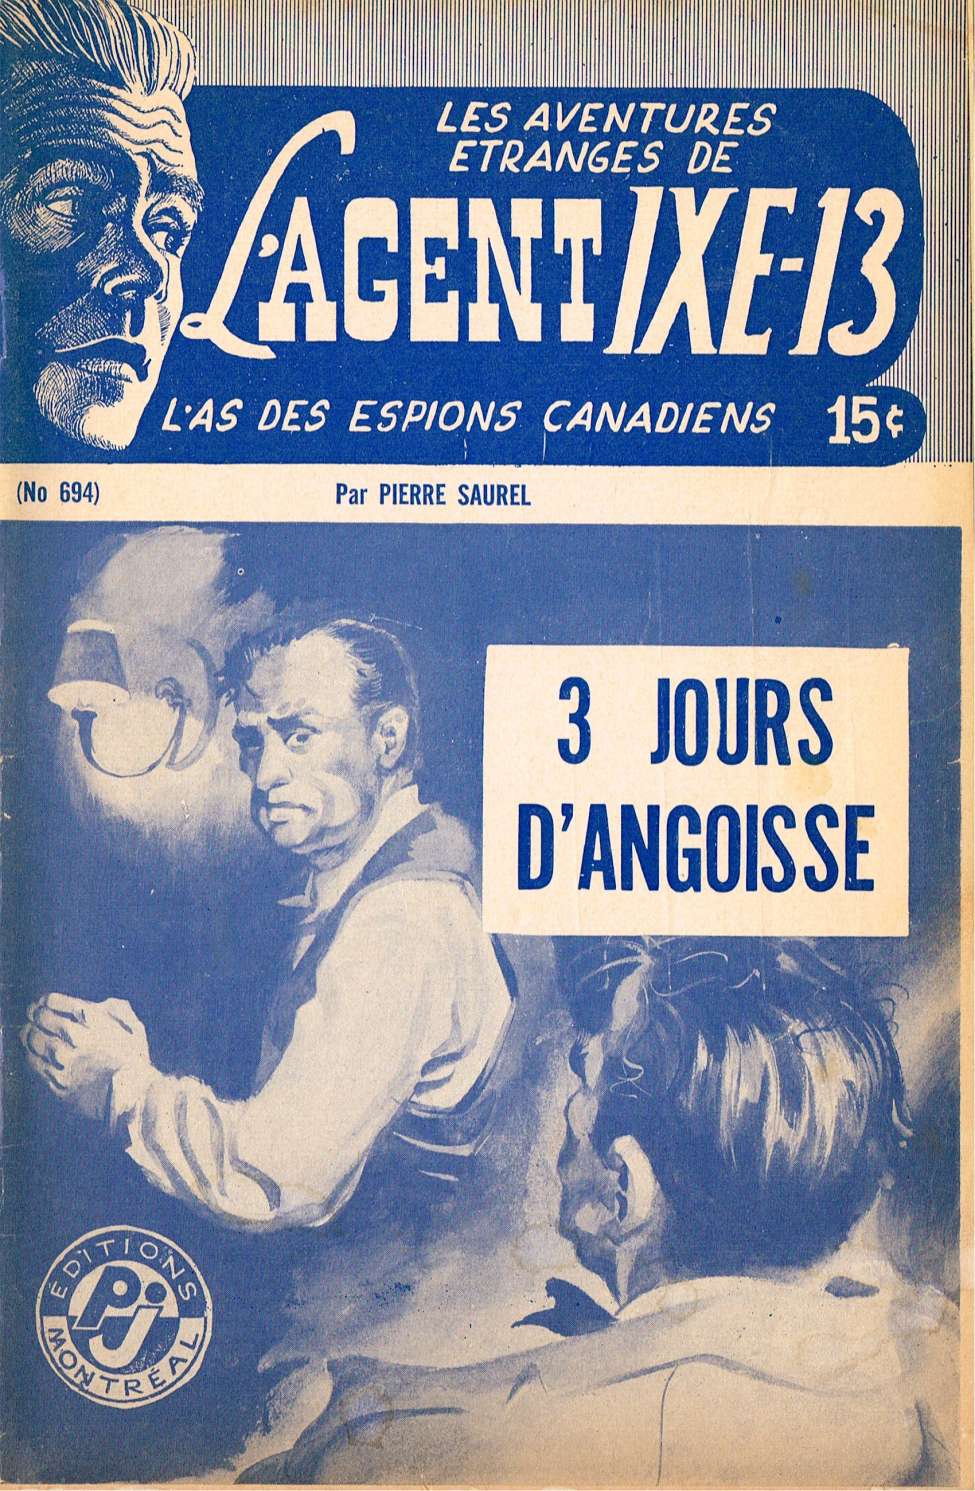 Book Cover For L'Agent IXE-13 v2 694 - 3 jours d'angoisse